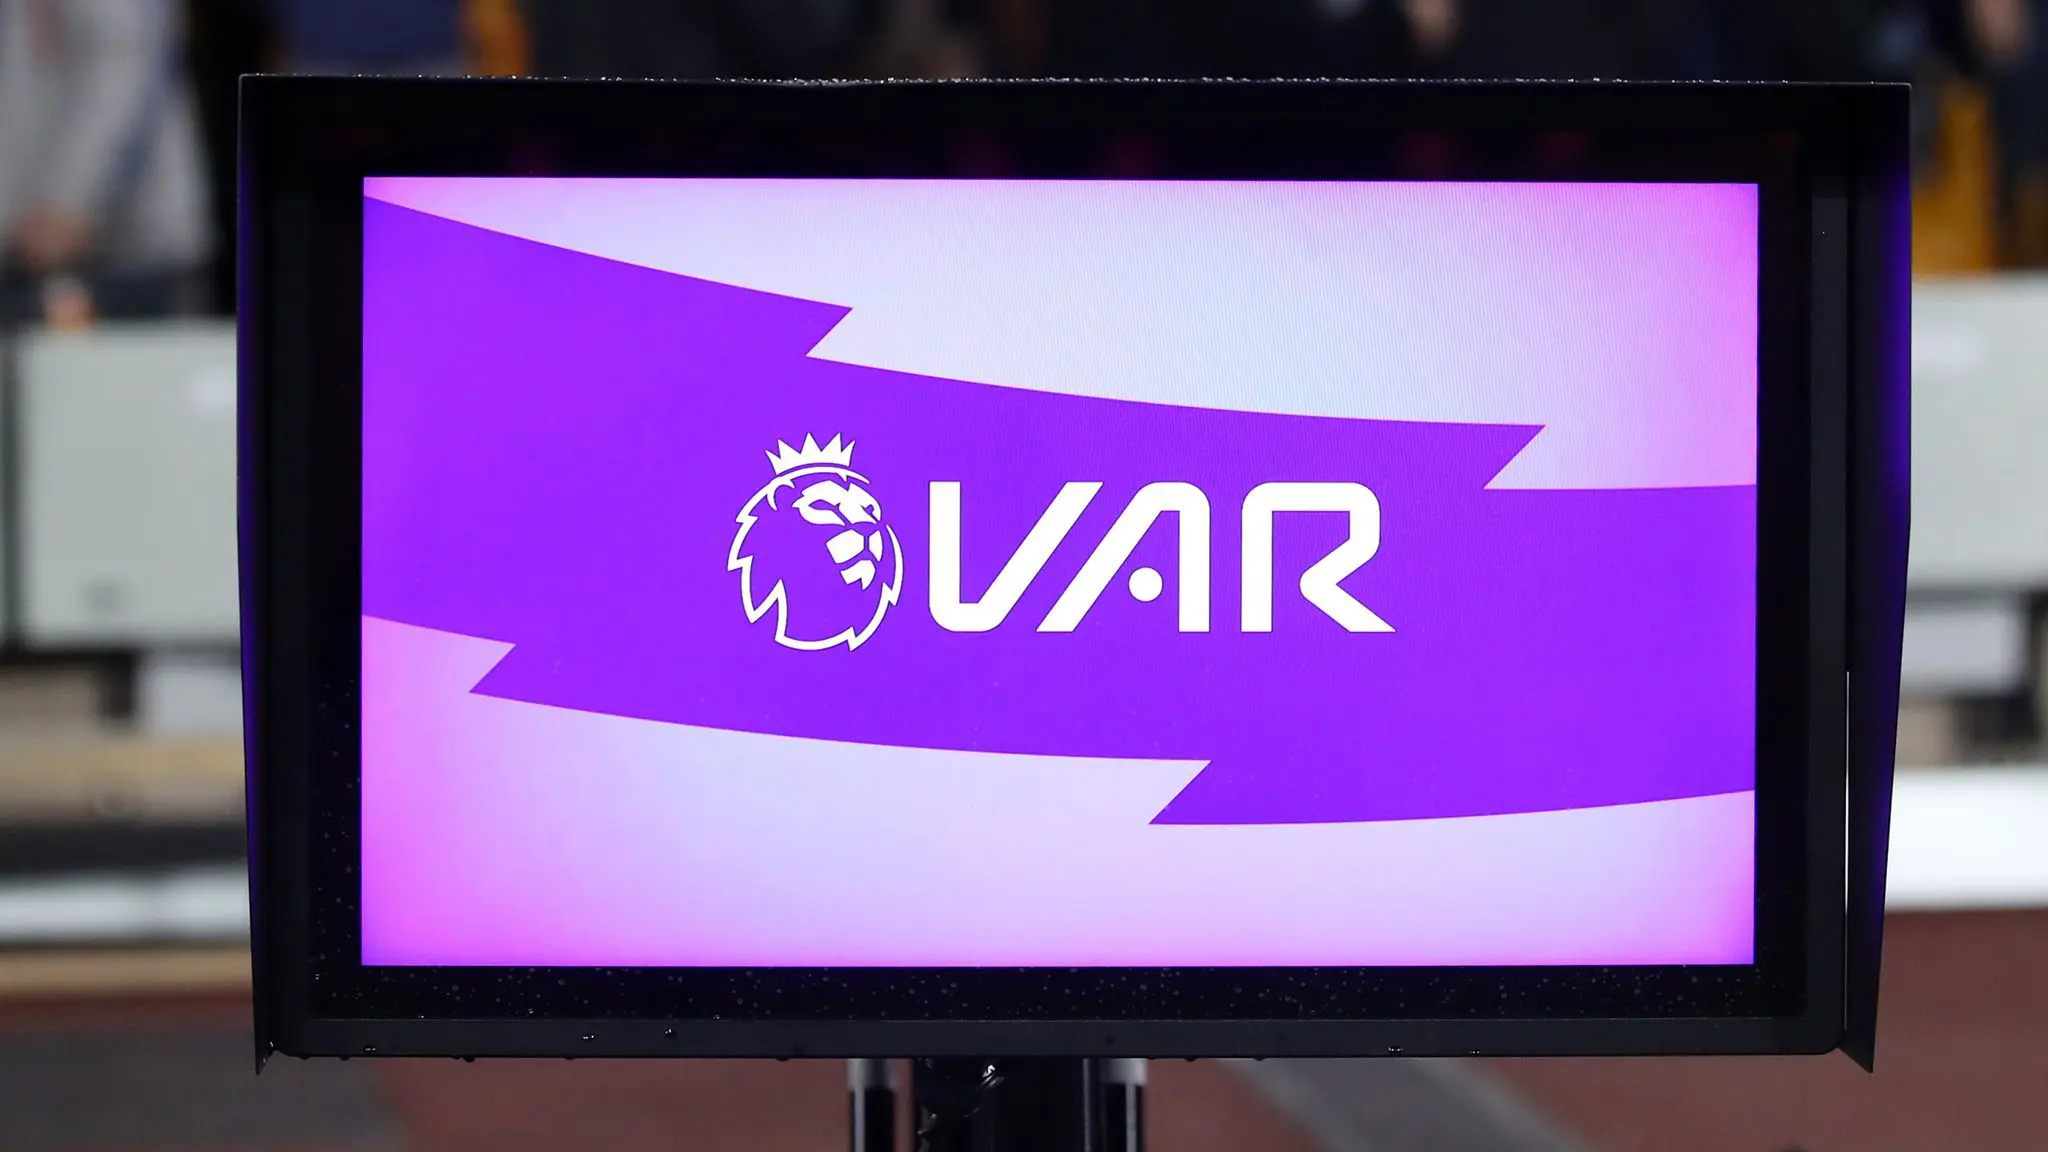 EPL: Two changes to be made to VAR